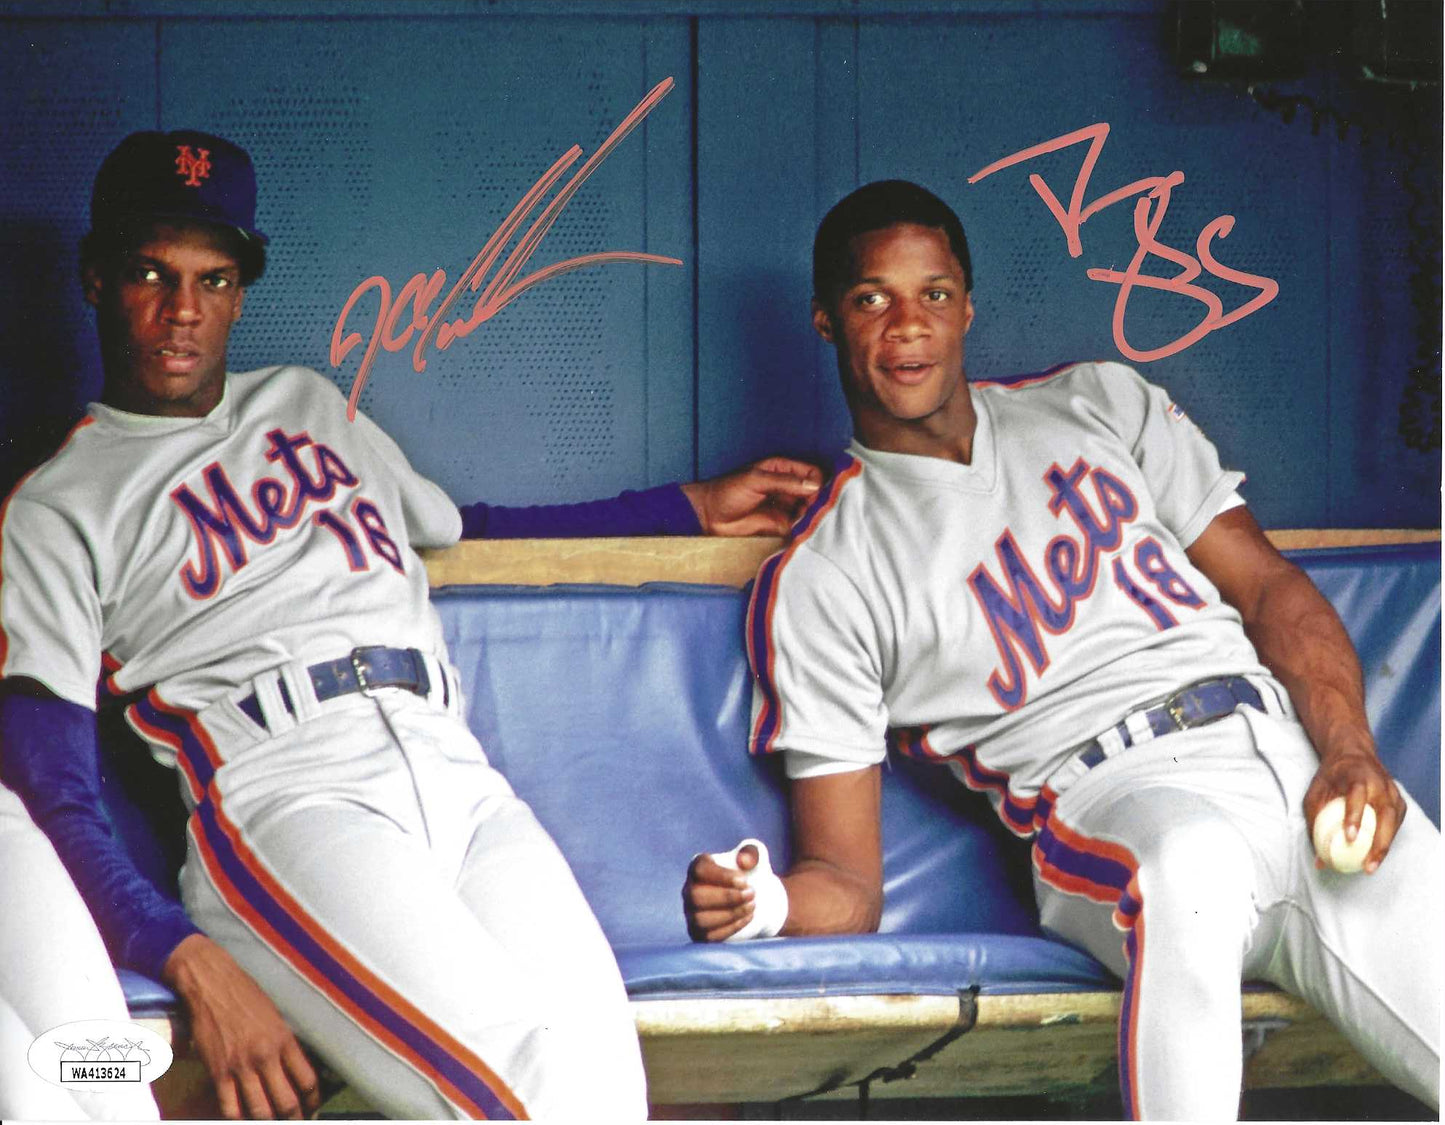 New York Mets Dwight (Doc) Gooden & Darryl Strawberry Autographed 8x10 Photo